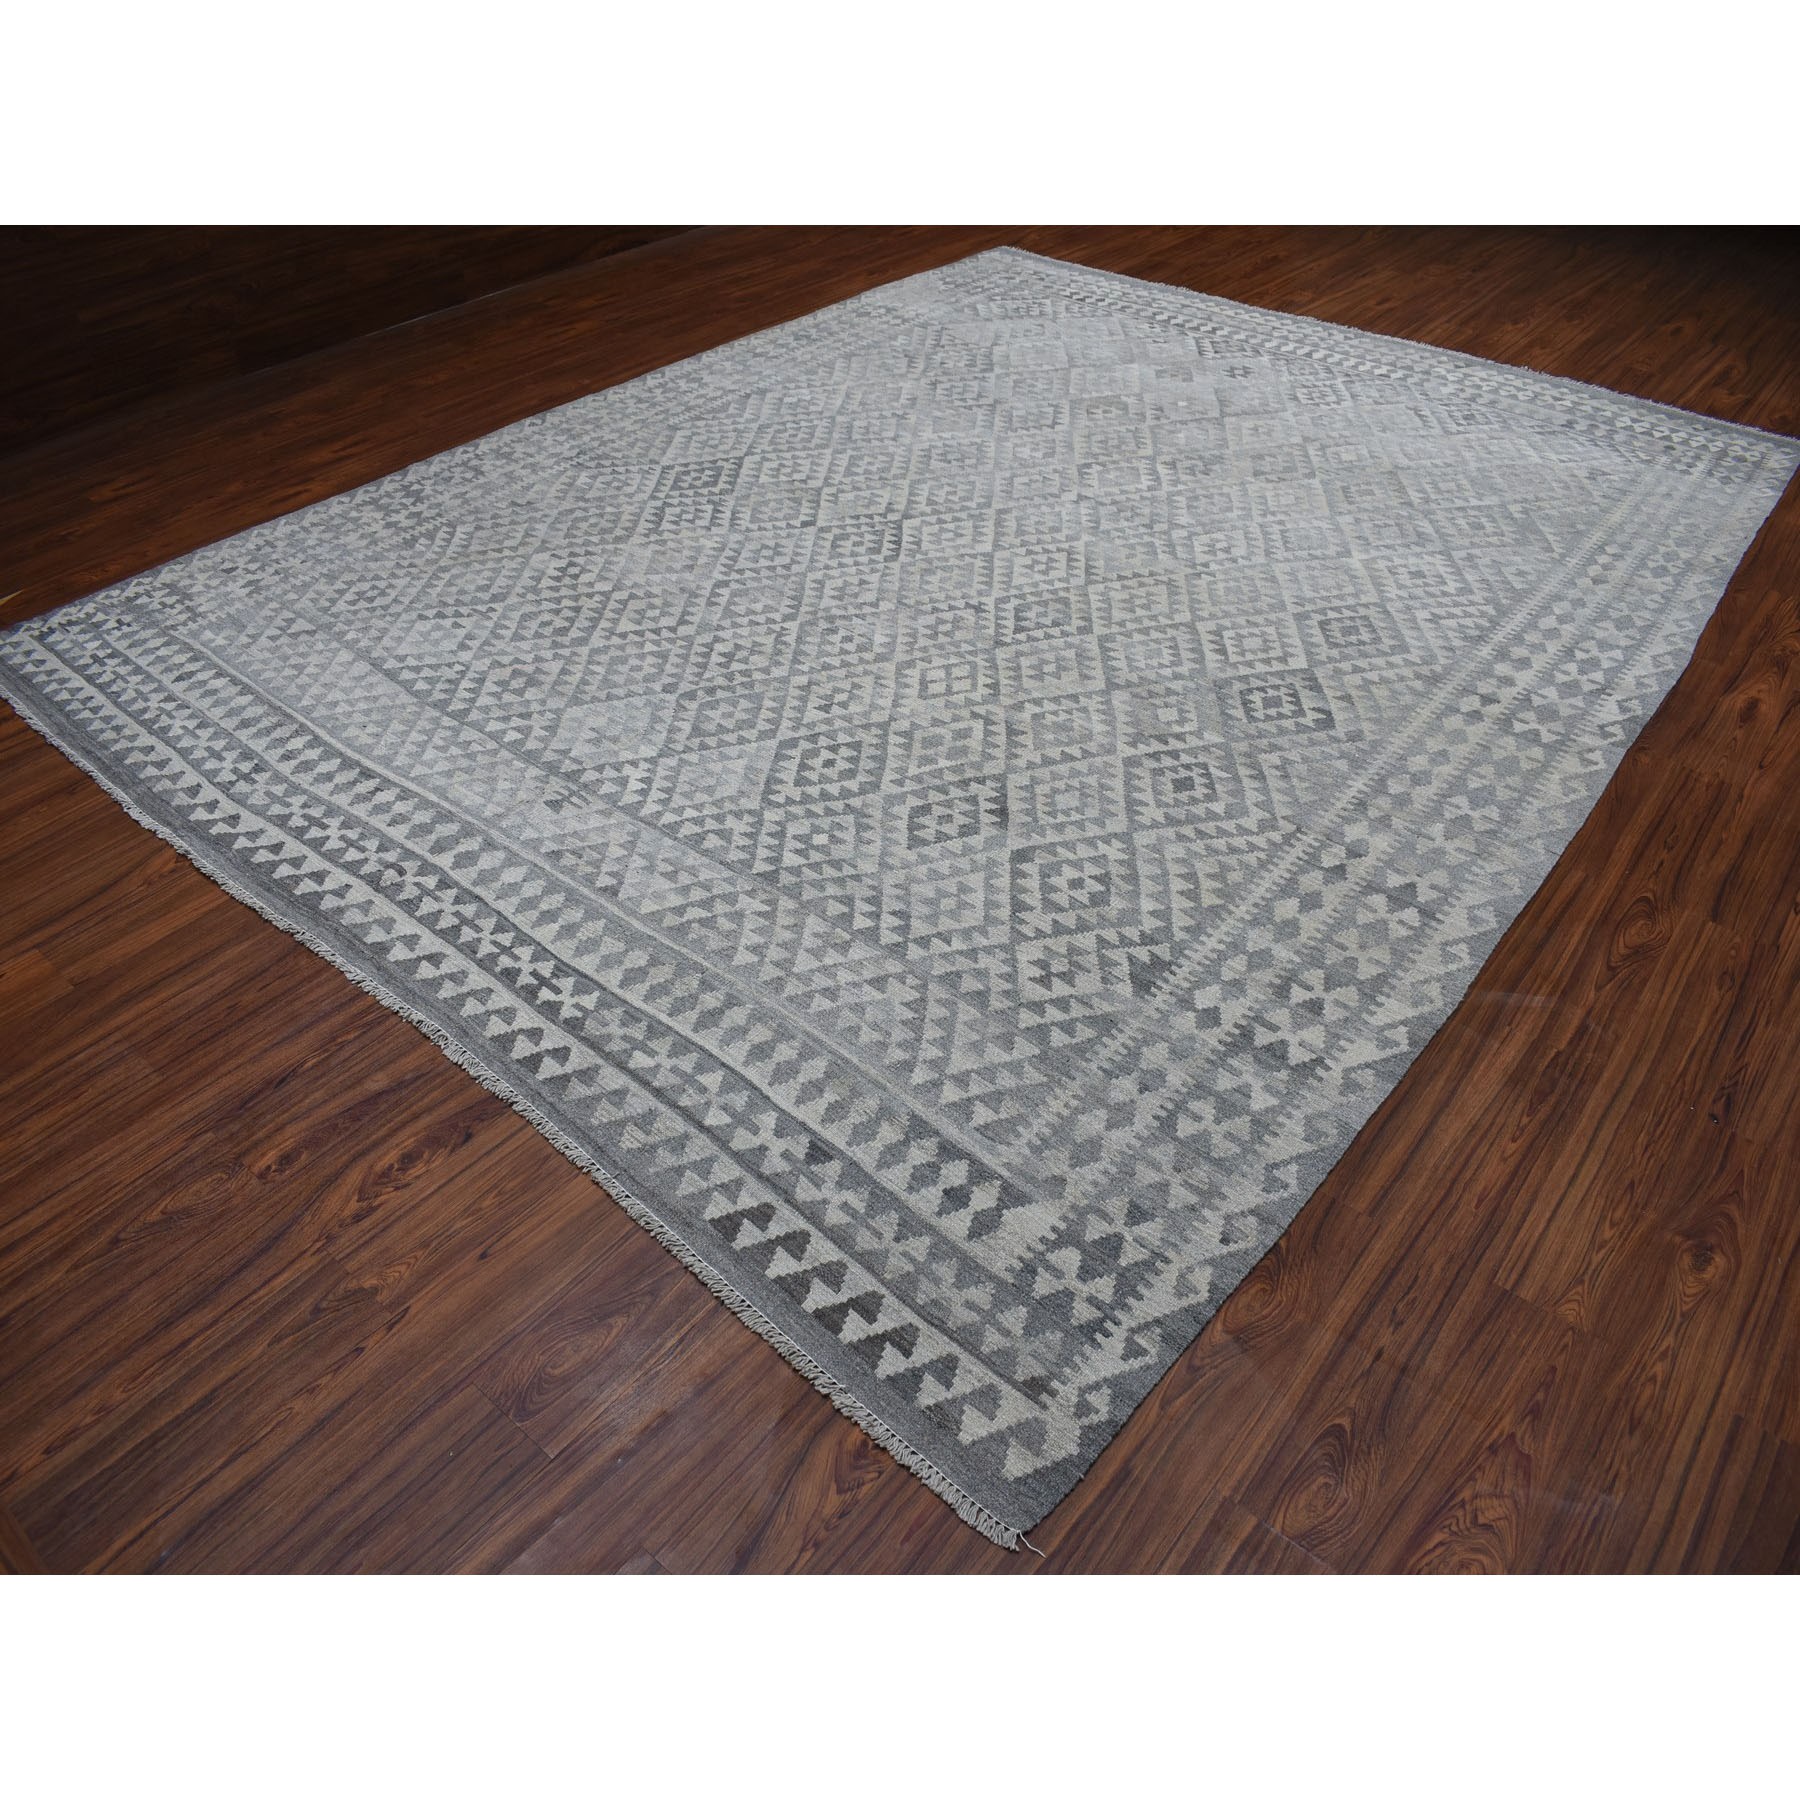 10-2 x12-10  Undyed Natural Wool Afghan Kilim Reversible Hand Woven Oriental Rug 